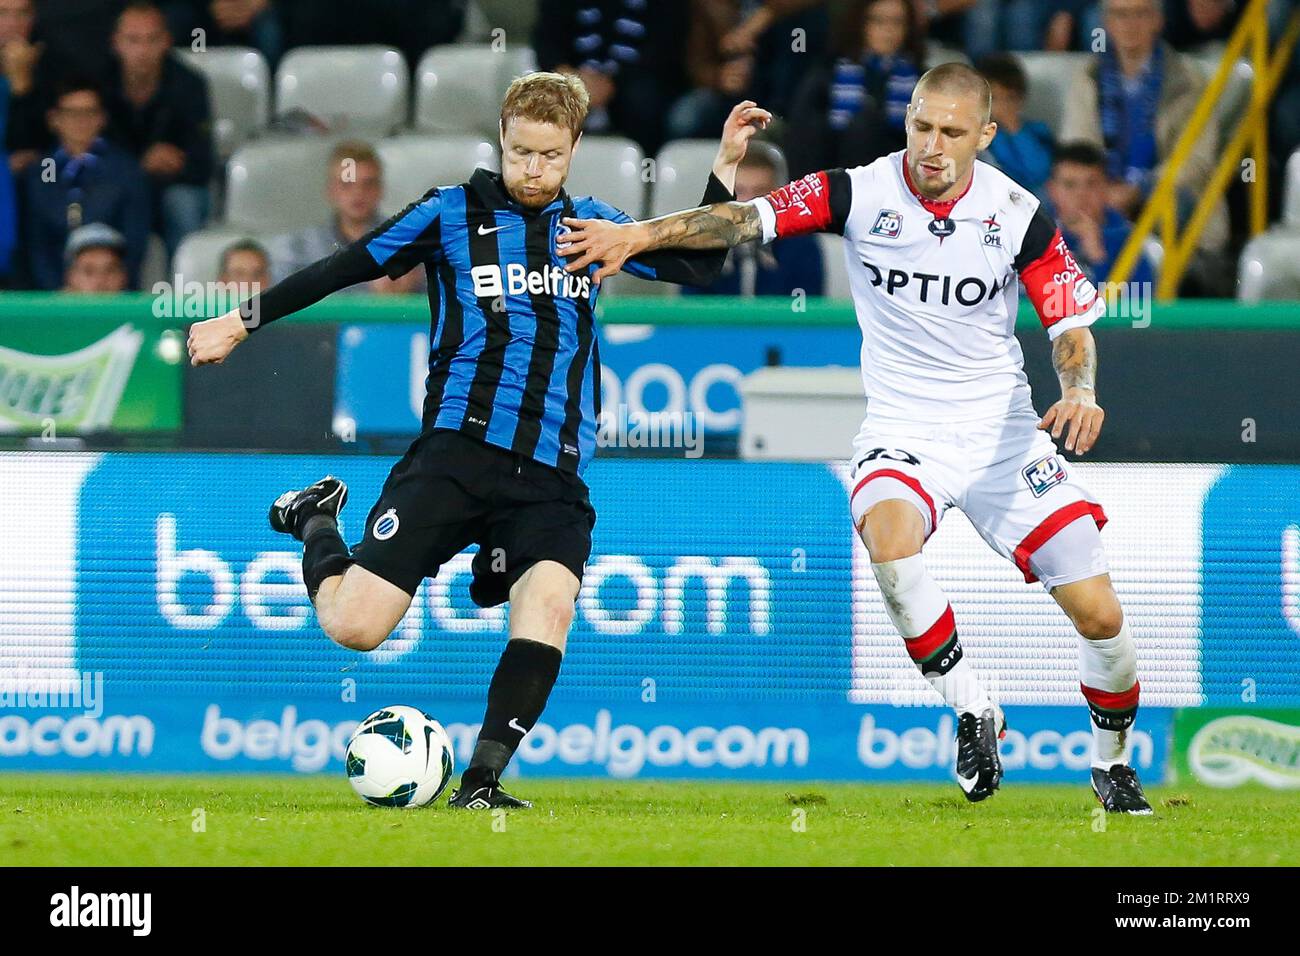 Club's Tom Hogli and OHL's Muhamed Subasic fight for the ball during the Jupiler Pro League match between Club Brugge and Oud-Heverlee Leuven, in Brugge, Saturday 05 October 2013, on day 10 of the Belgian soccer championship.  Stock Photo